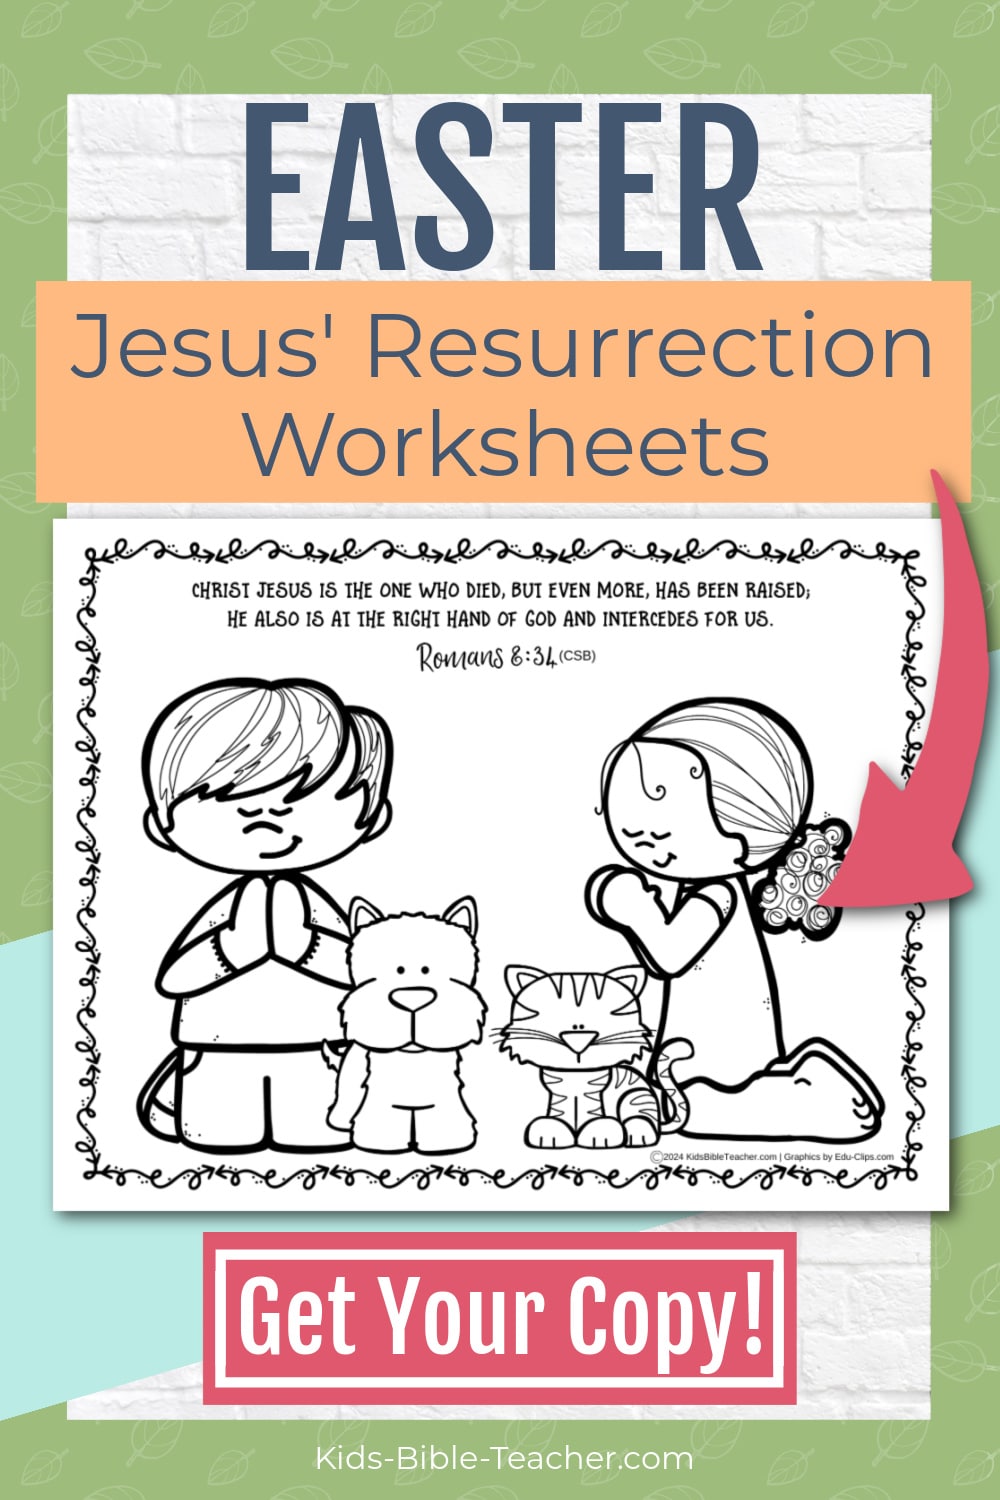 Jesus' Resurrection Worksheet with Easter Bible Verses Easter Coloring Pages